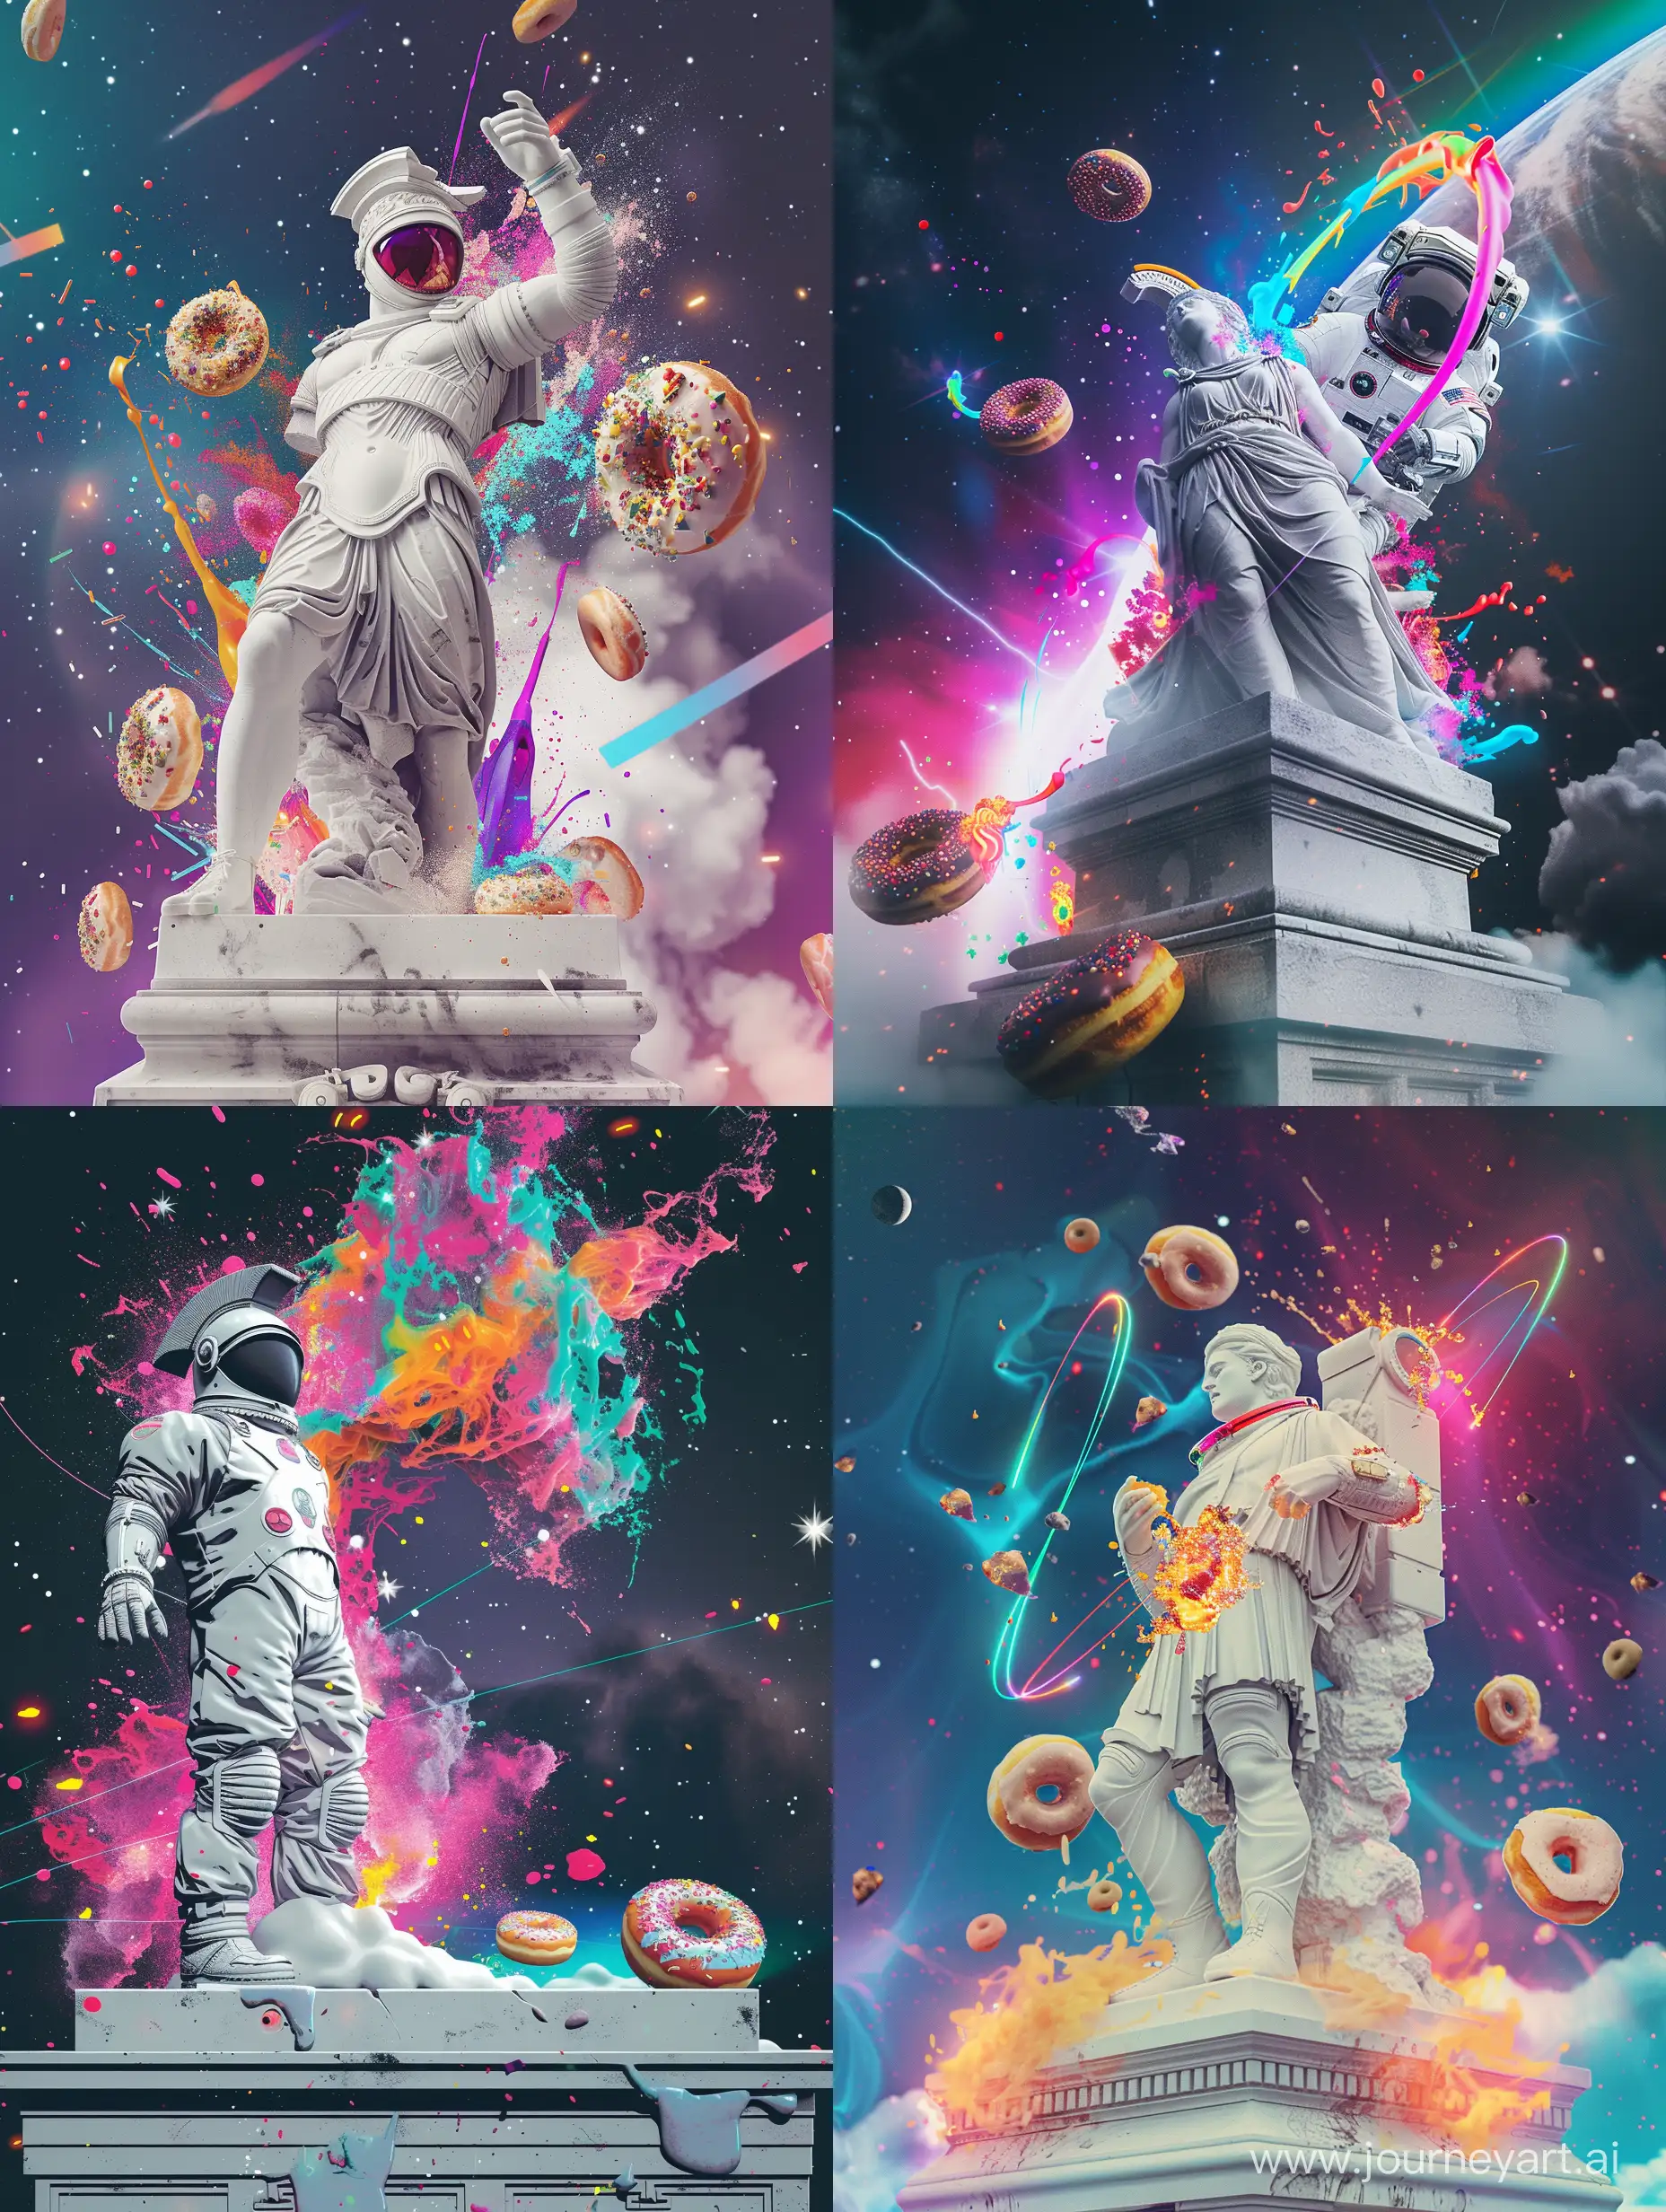 Cyberpunk synthwave Greek statue, exploding doughnuts food splatter and icing, spacesuit in white, against a night sky, with science fiction colorful light effects. Make it 2:3 aspect ratio for the statue and doughnuts, and 4:5 aspect ratio for the spacesuit in the night sky. --v 6 --ar 3:4 --no 41159